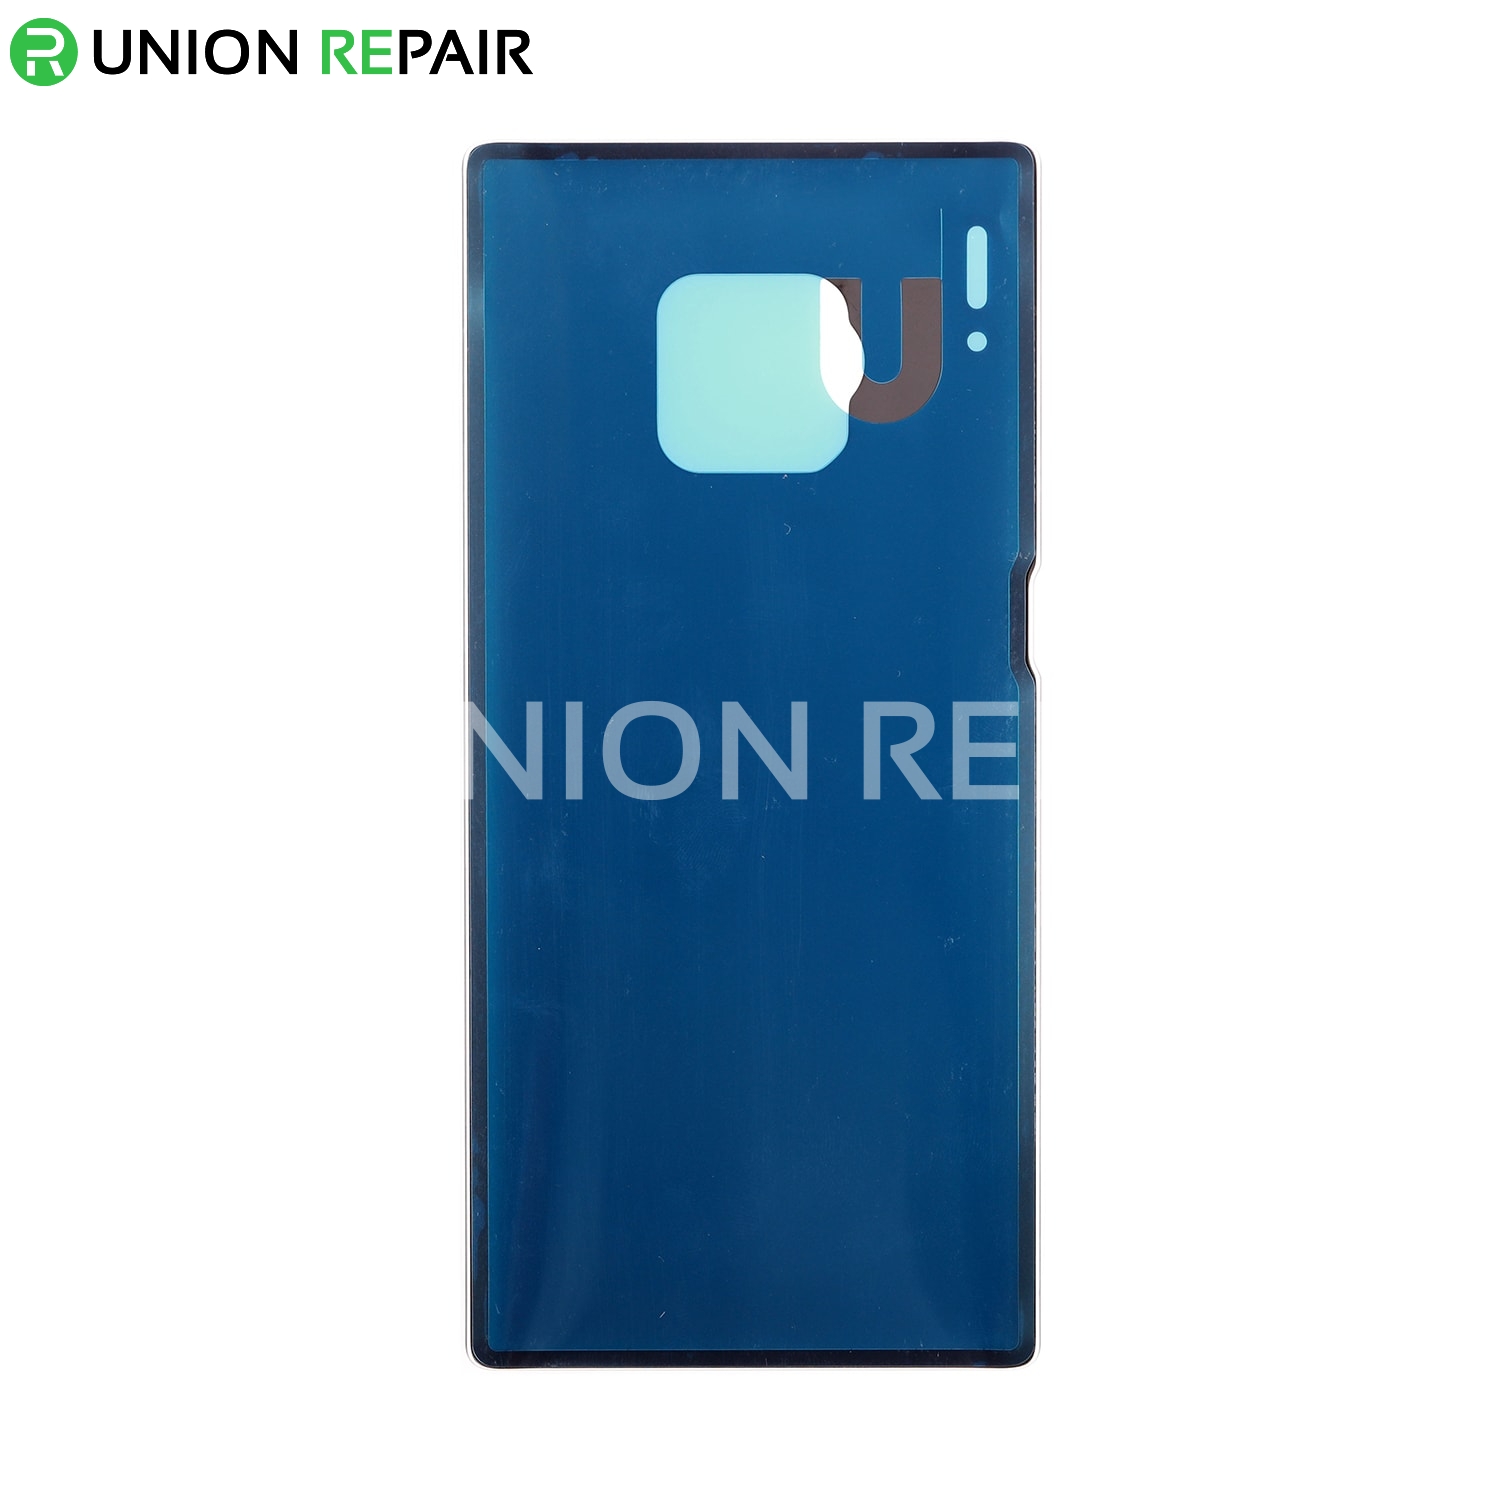 Replacement for Huawei Mate 30 Pro Battery Door - Emerald Green